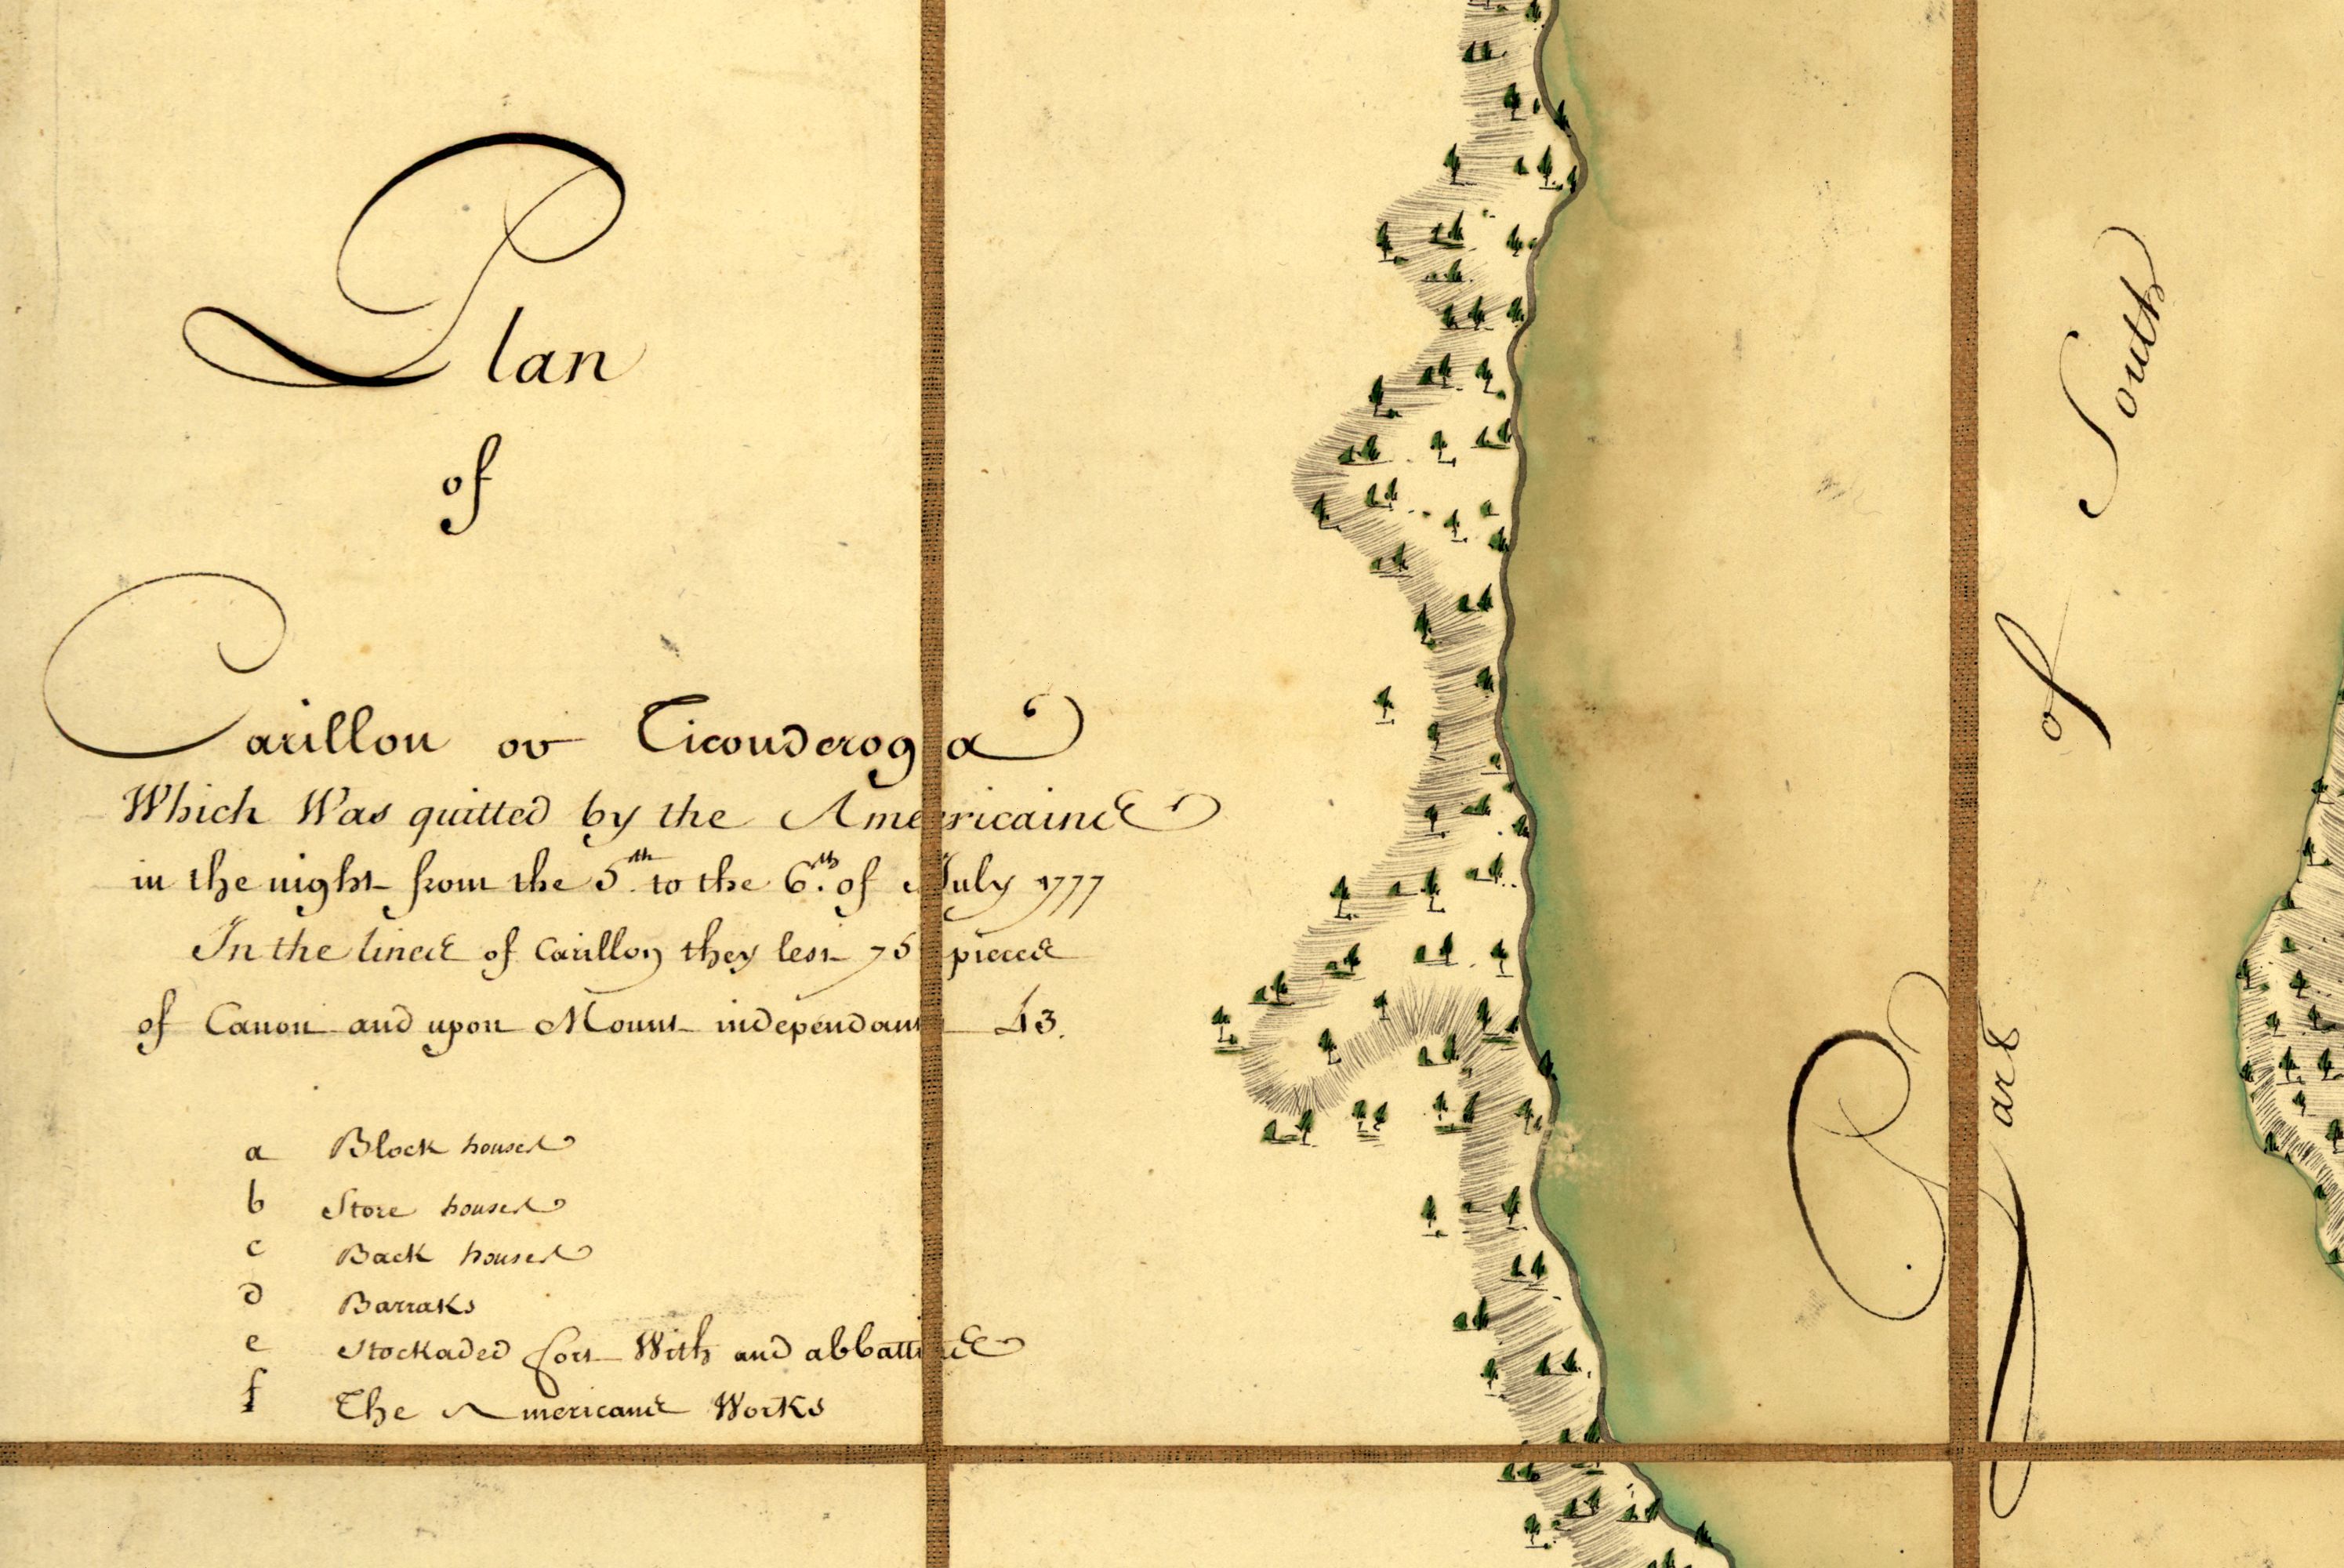 detail from Captiaine du Chesnoy's 1777 map "Plan of Carillon ou [sic] Ticonderoga"